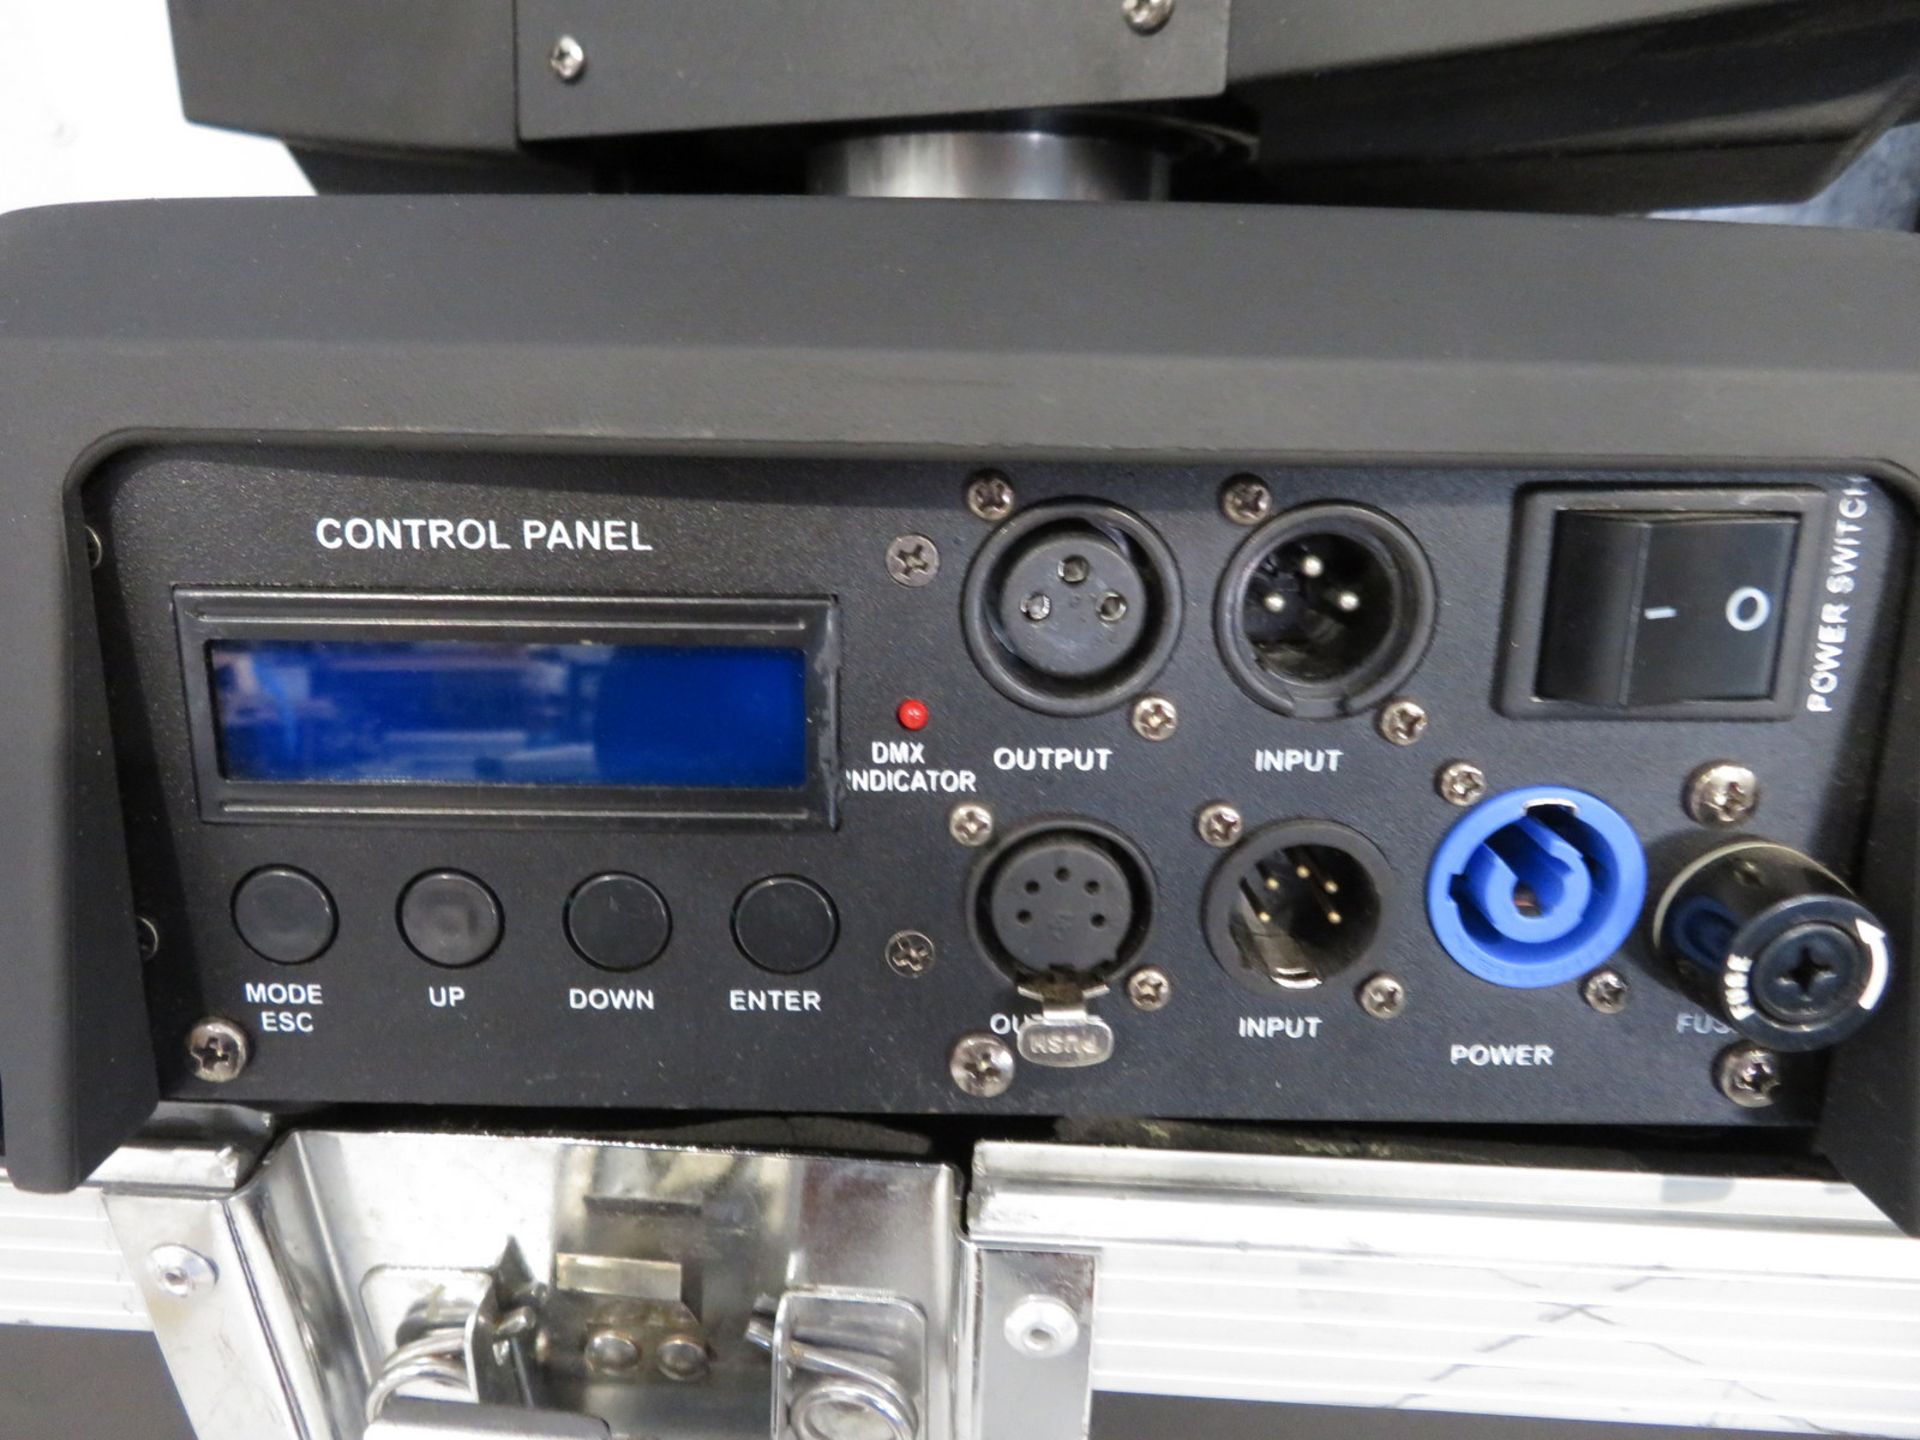 Pair of Showtec Phantom 300 Beams in flightcase. Includes hanging clamps and safety bonds. - Image 5 of 7